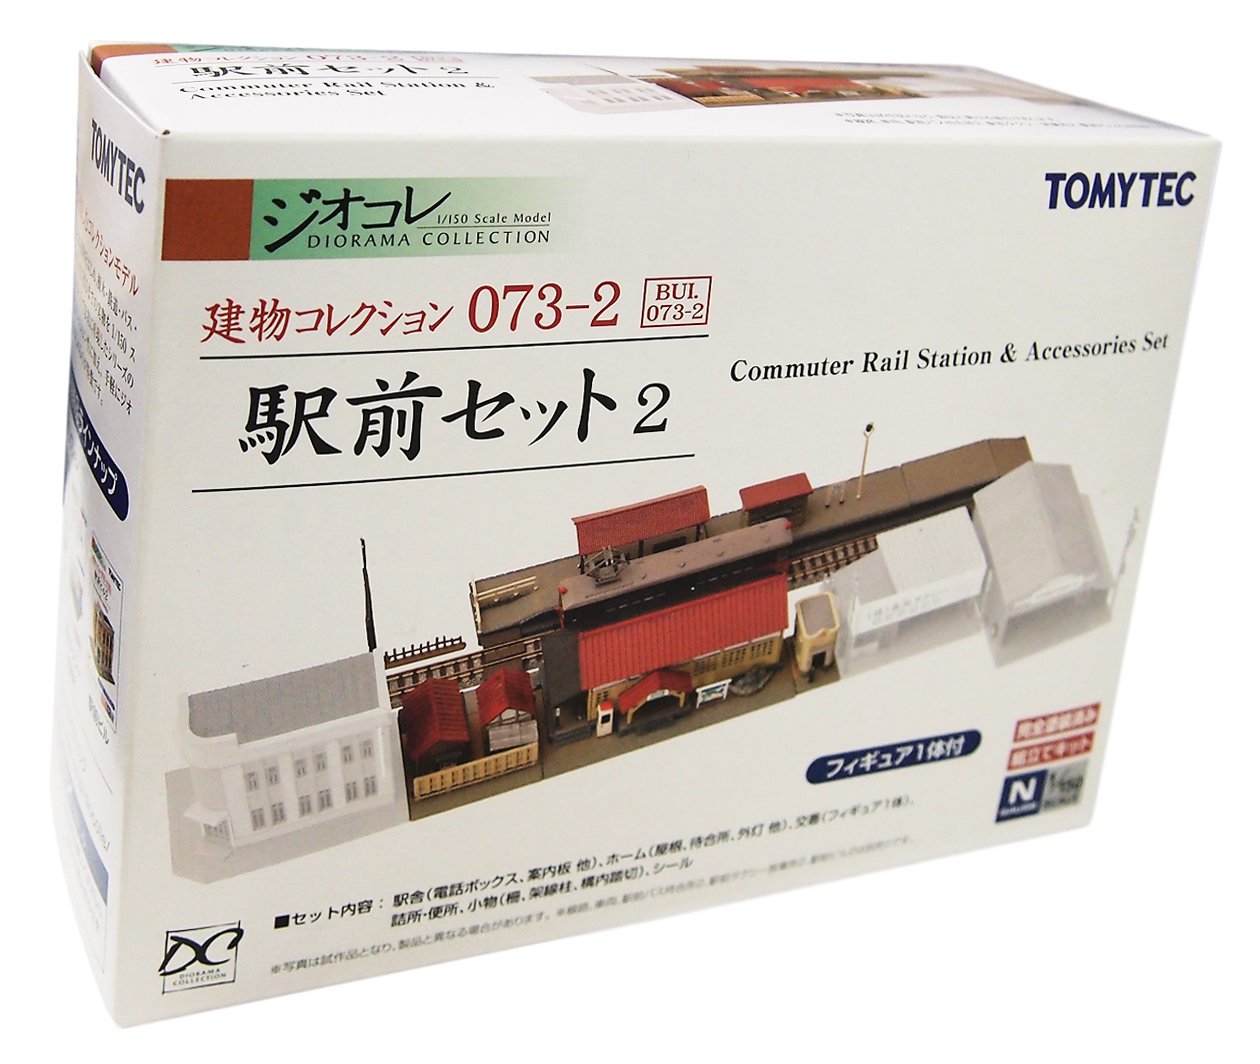 Tomytec Building Collection Kenkore 073-2 - Easy Assemble Station Set